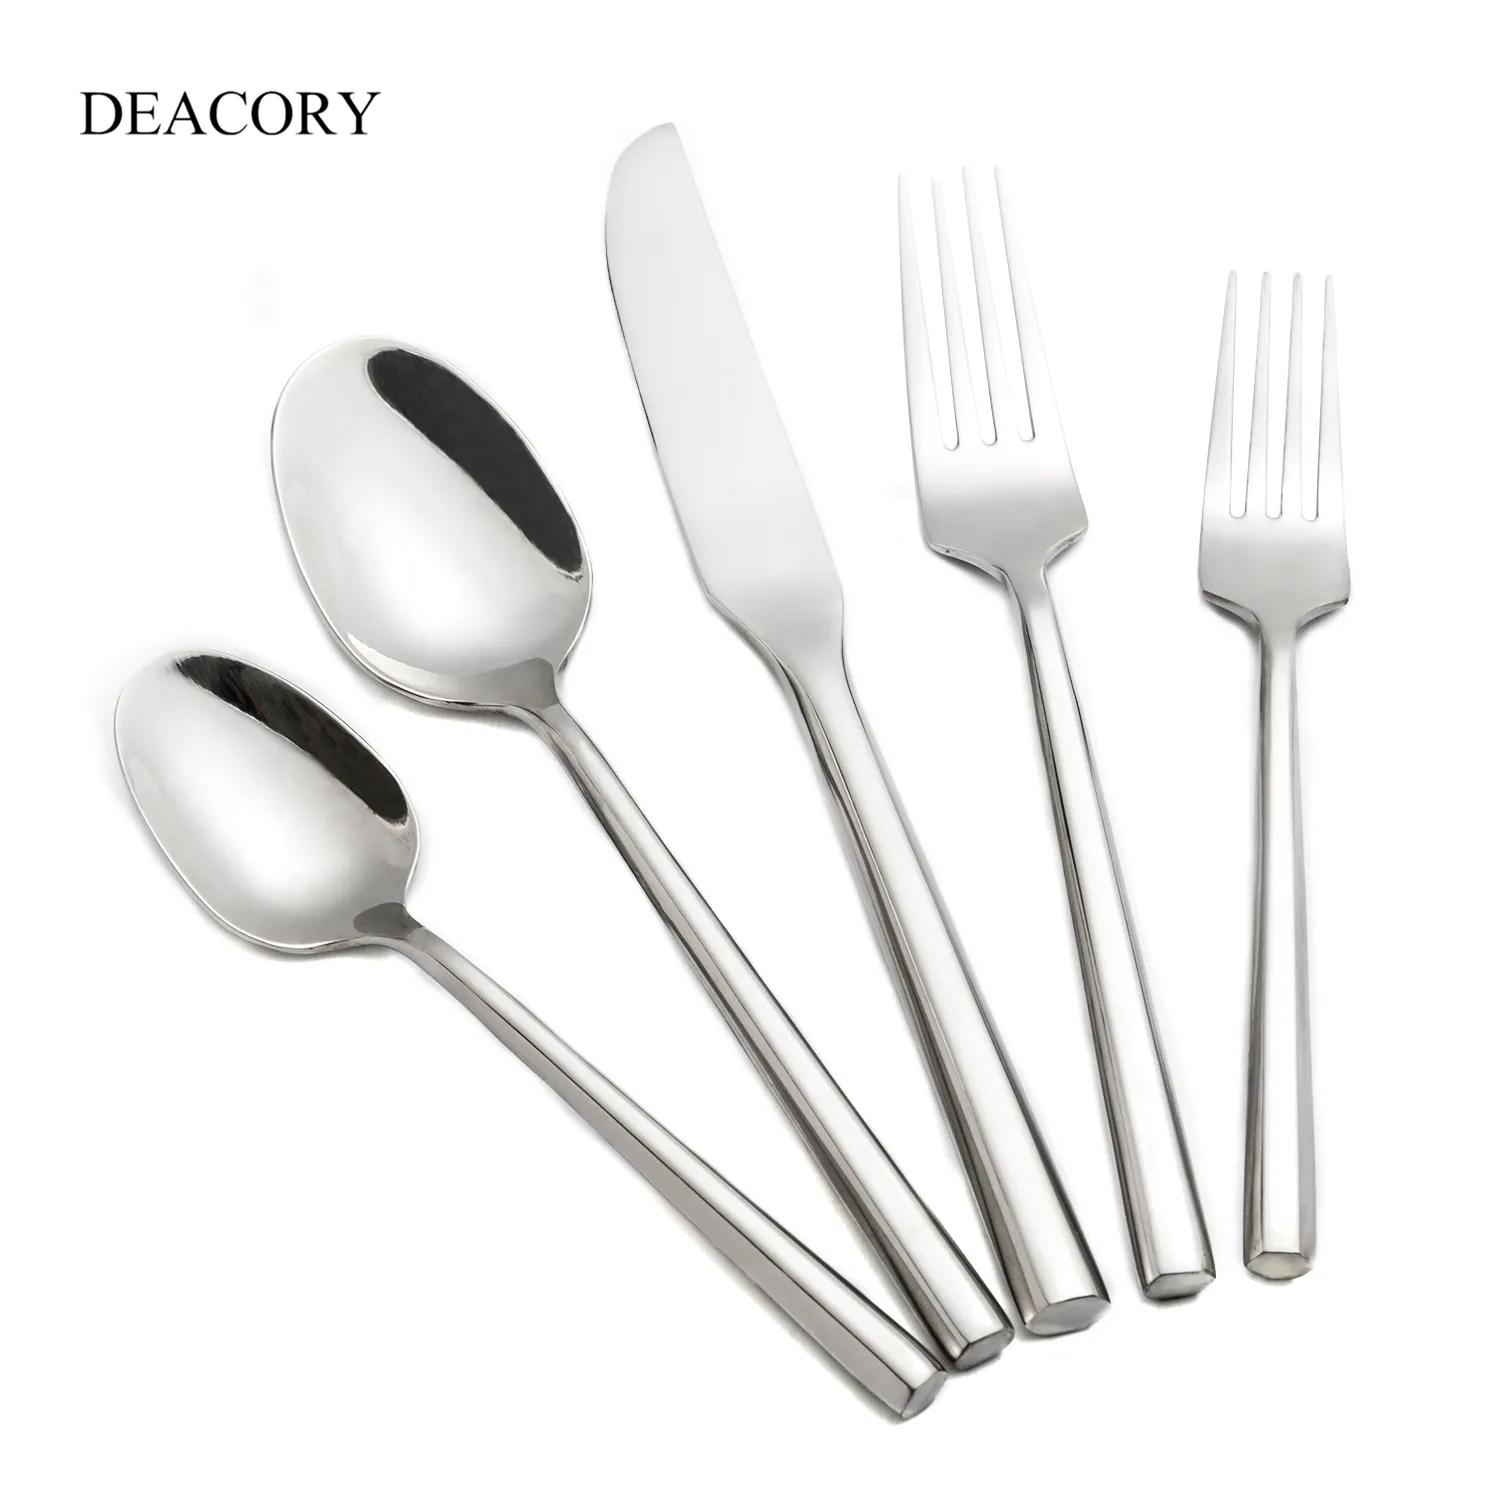 Wholesale Stainless Steel Cutleries Bulk Silver Flatware Fork Knife And Spoon Cutlery Party Dining Silverware Set